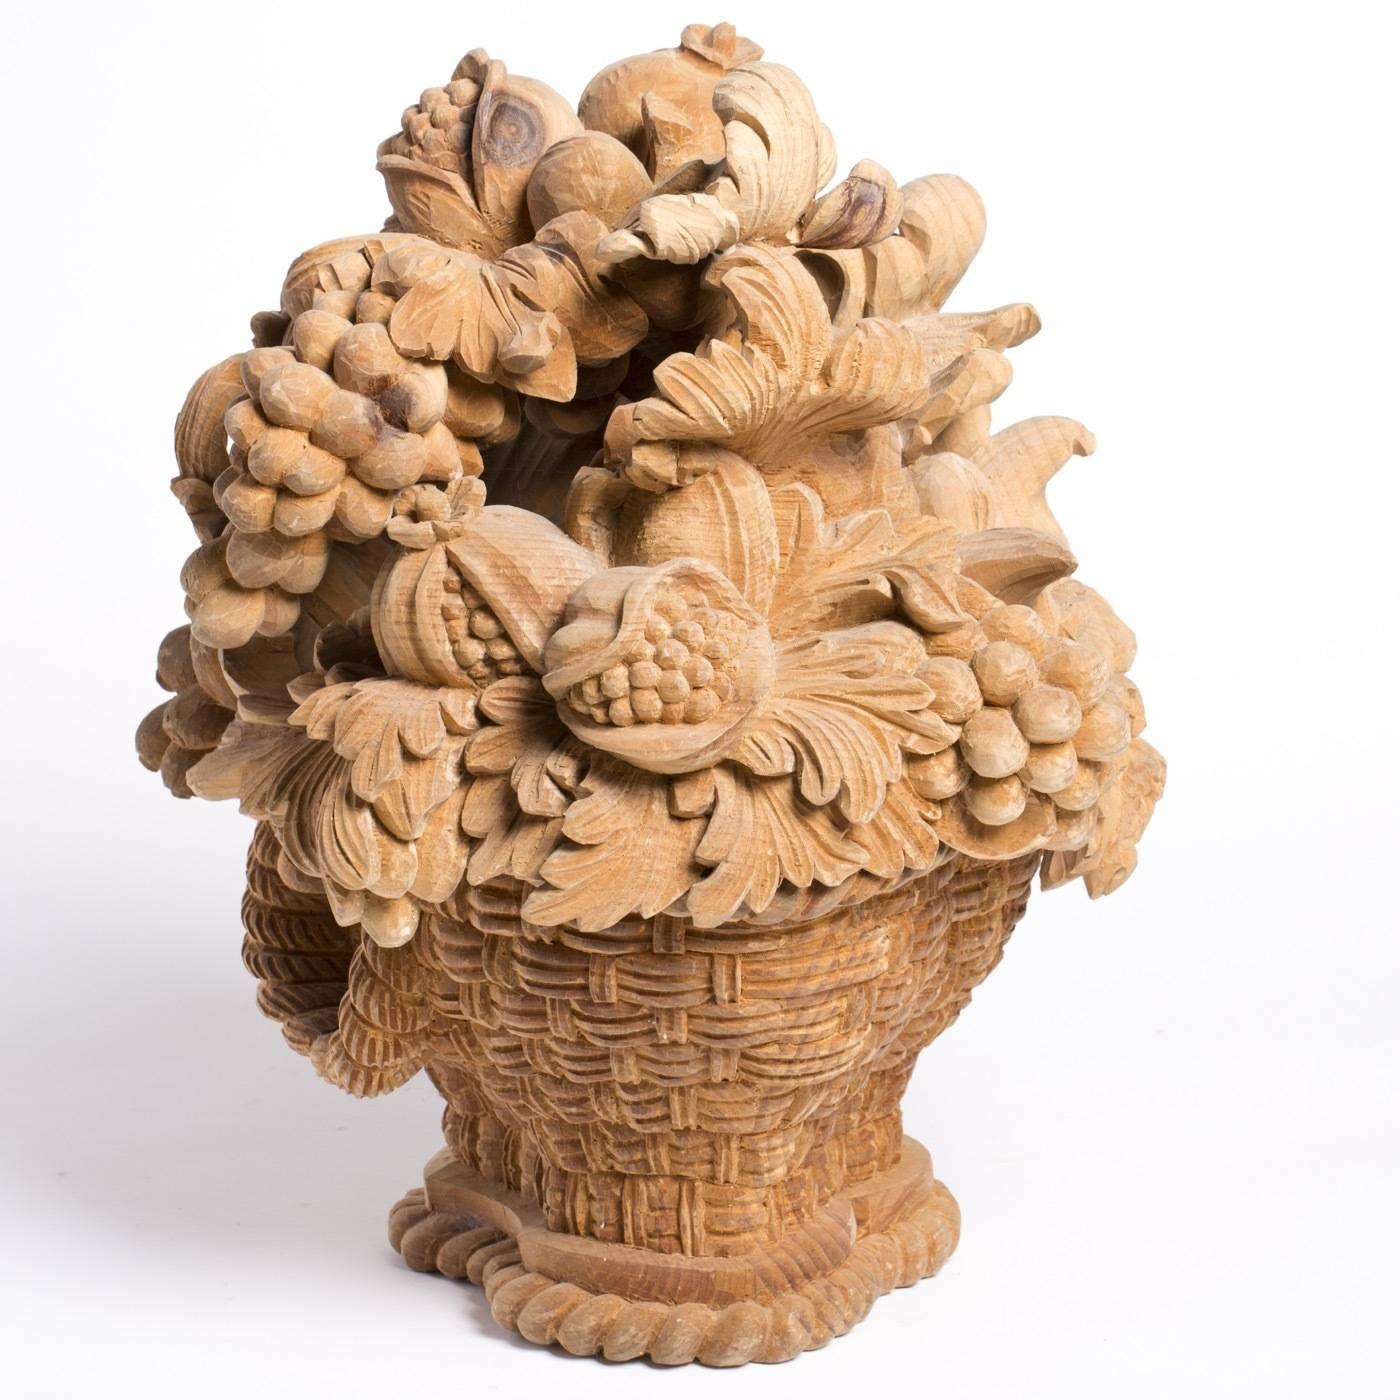 This ornamental centrepiece by Bartolozzi e Mailoli in Austrian pine was originally made for an Austrian Schloss. The fruit basket design, which features intricate detail in high relief, is entirely hand-carved with a natural wood finish.